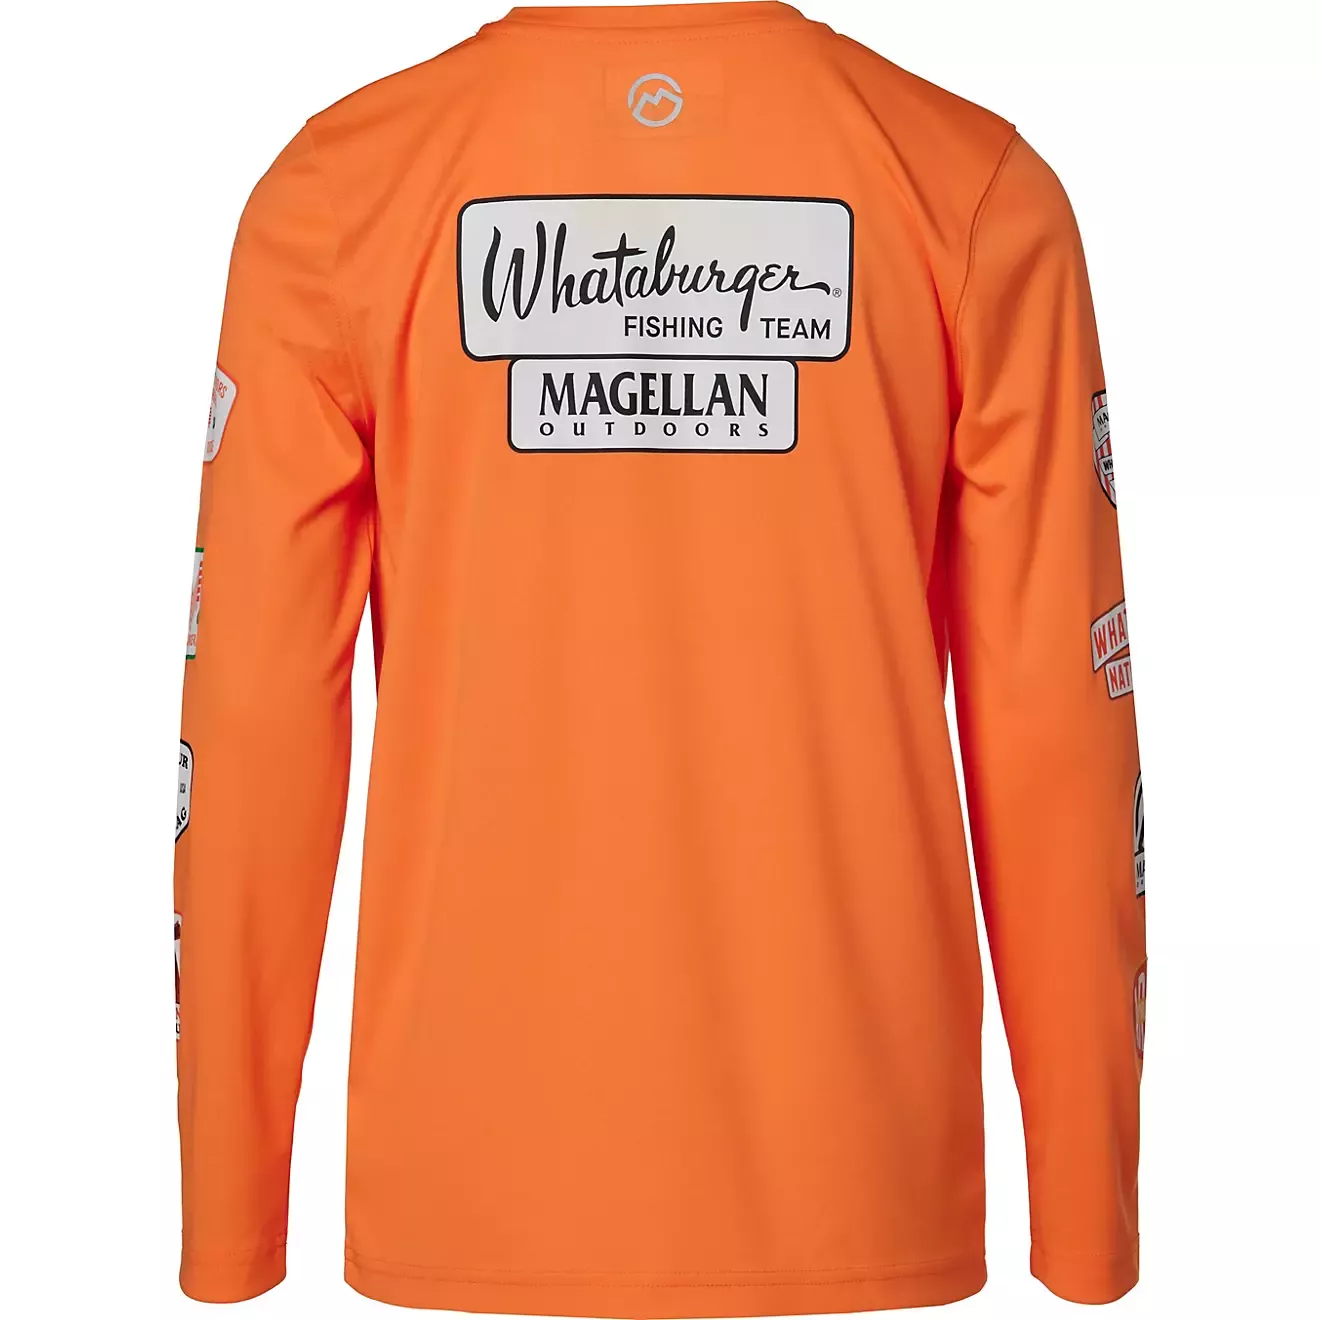 Academy Sports' Private Label Magellan Launches Whataburger Clothing